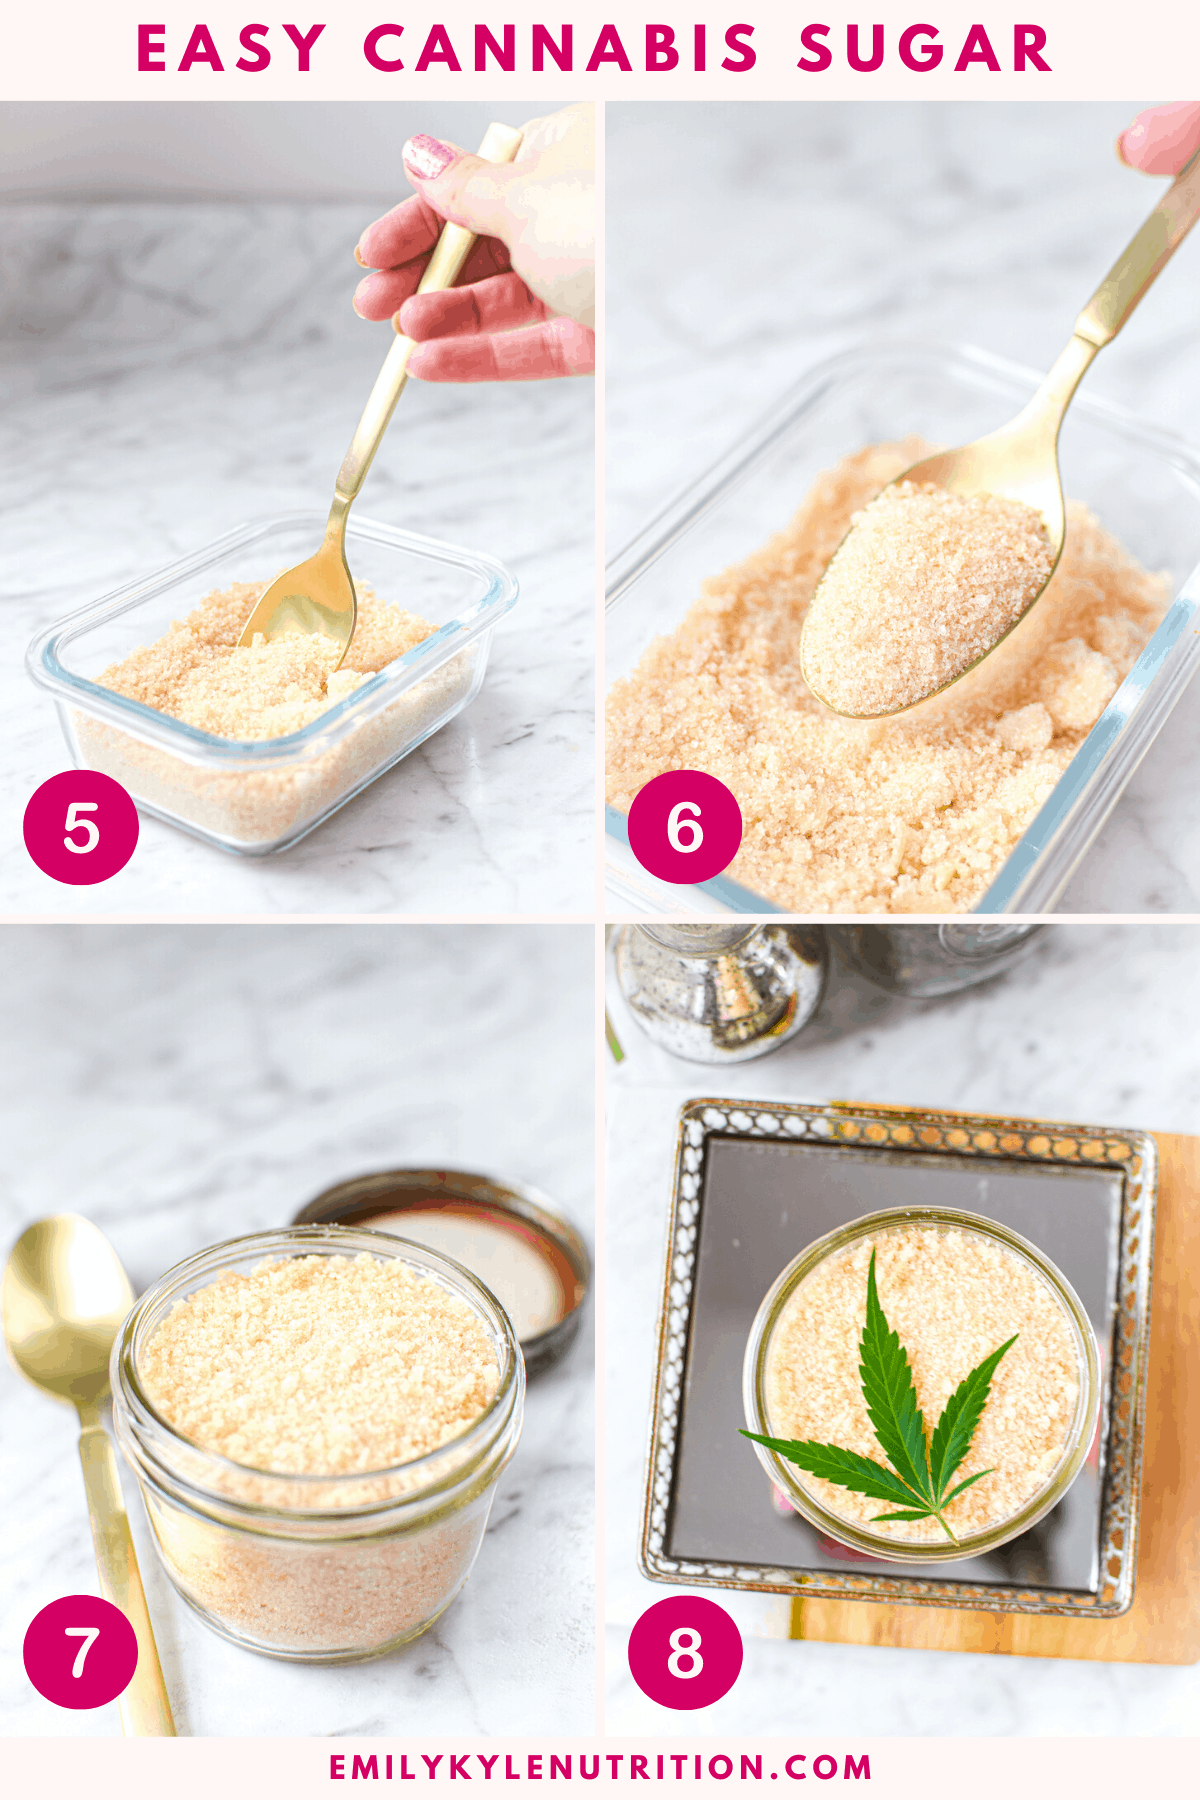 A four step image collage showing steps 5-8 in making cannabis sugar including stirring the mixture, an unclose picture of the sugar, a picture of it in a mason jar and garnished with a cannabis leaf.